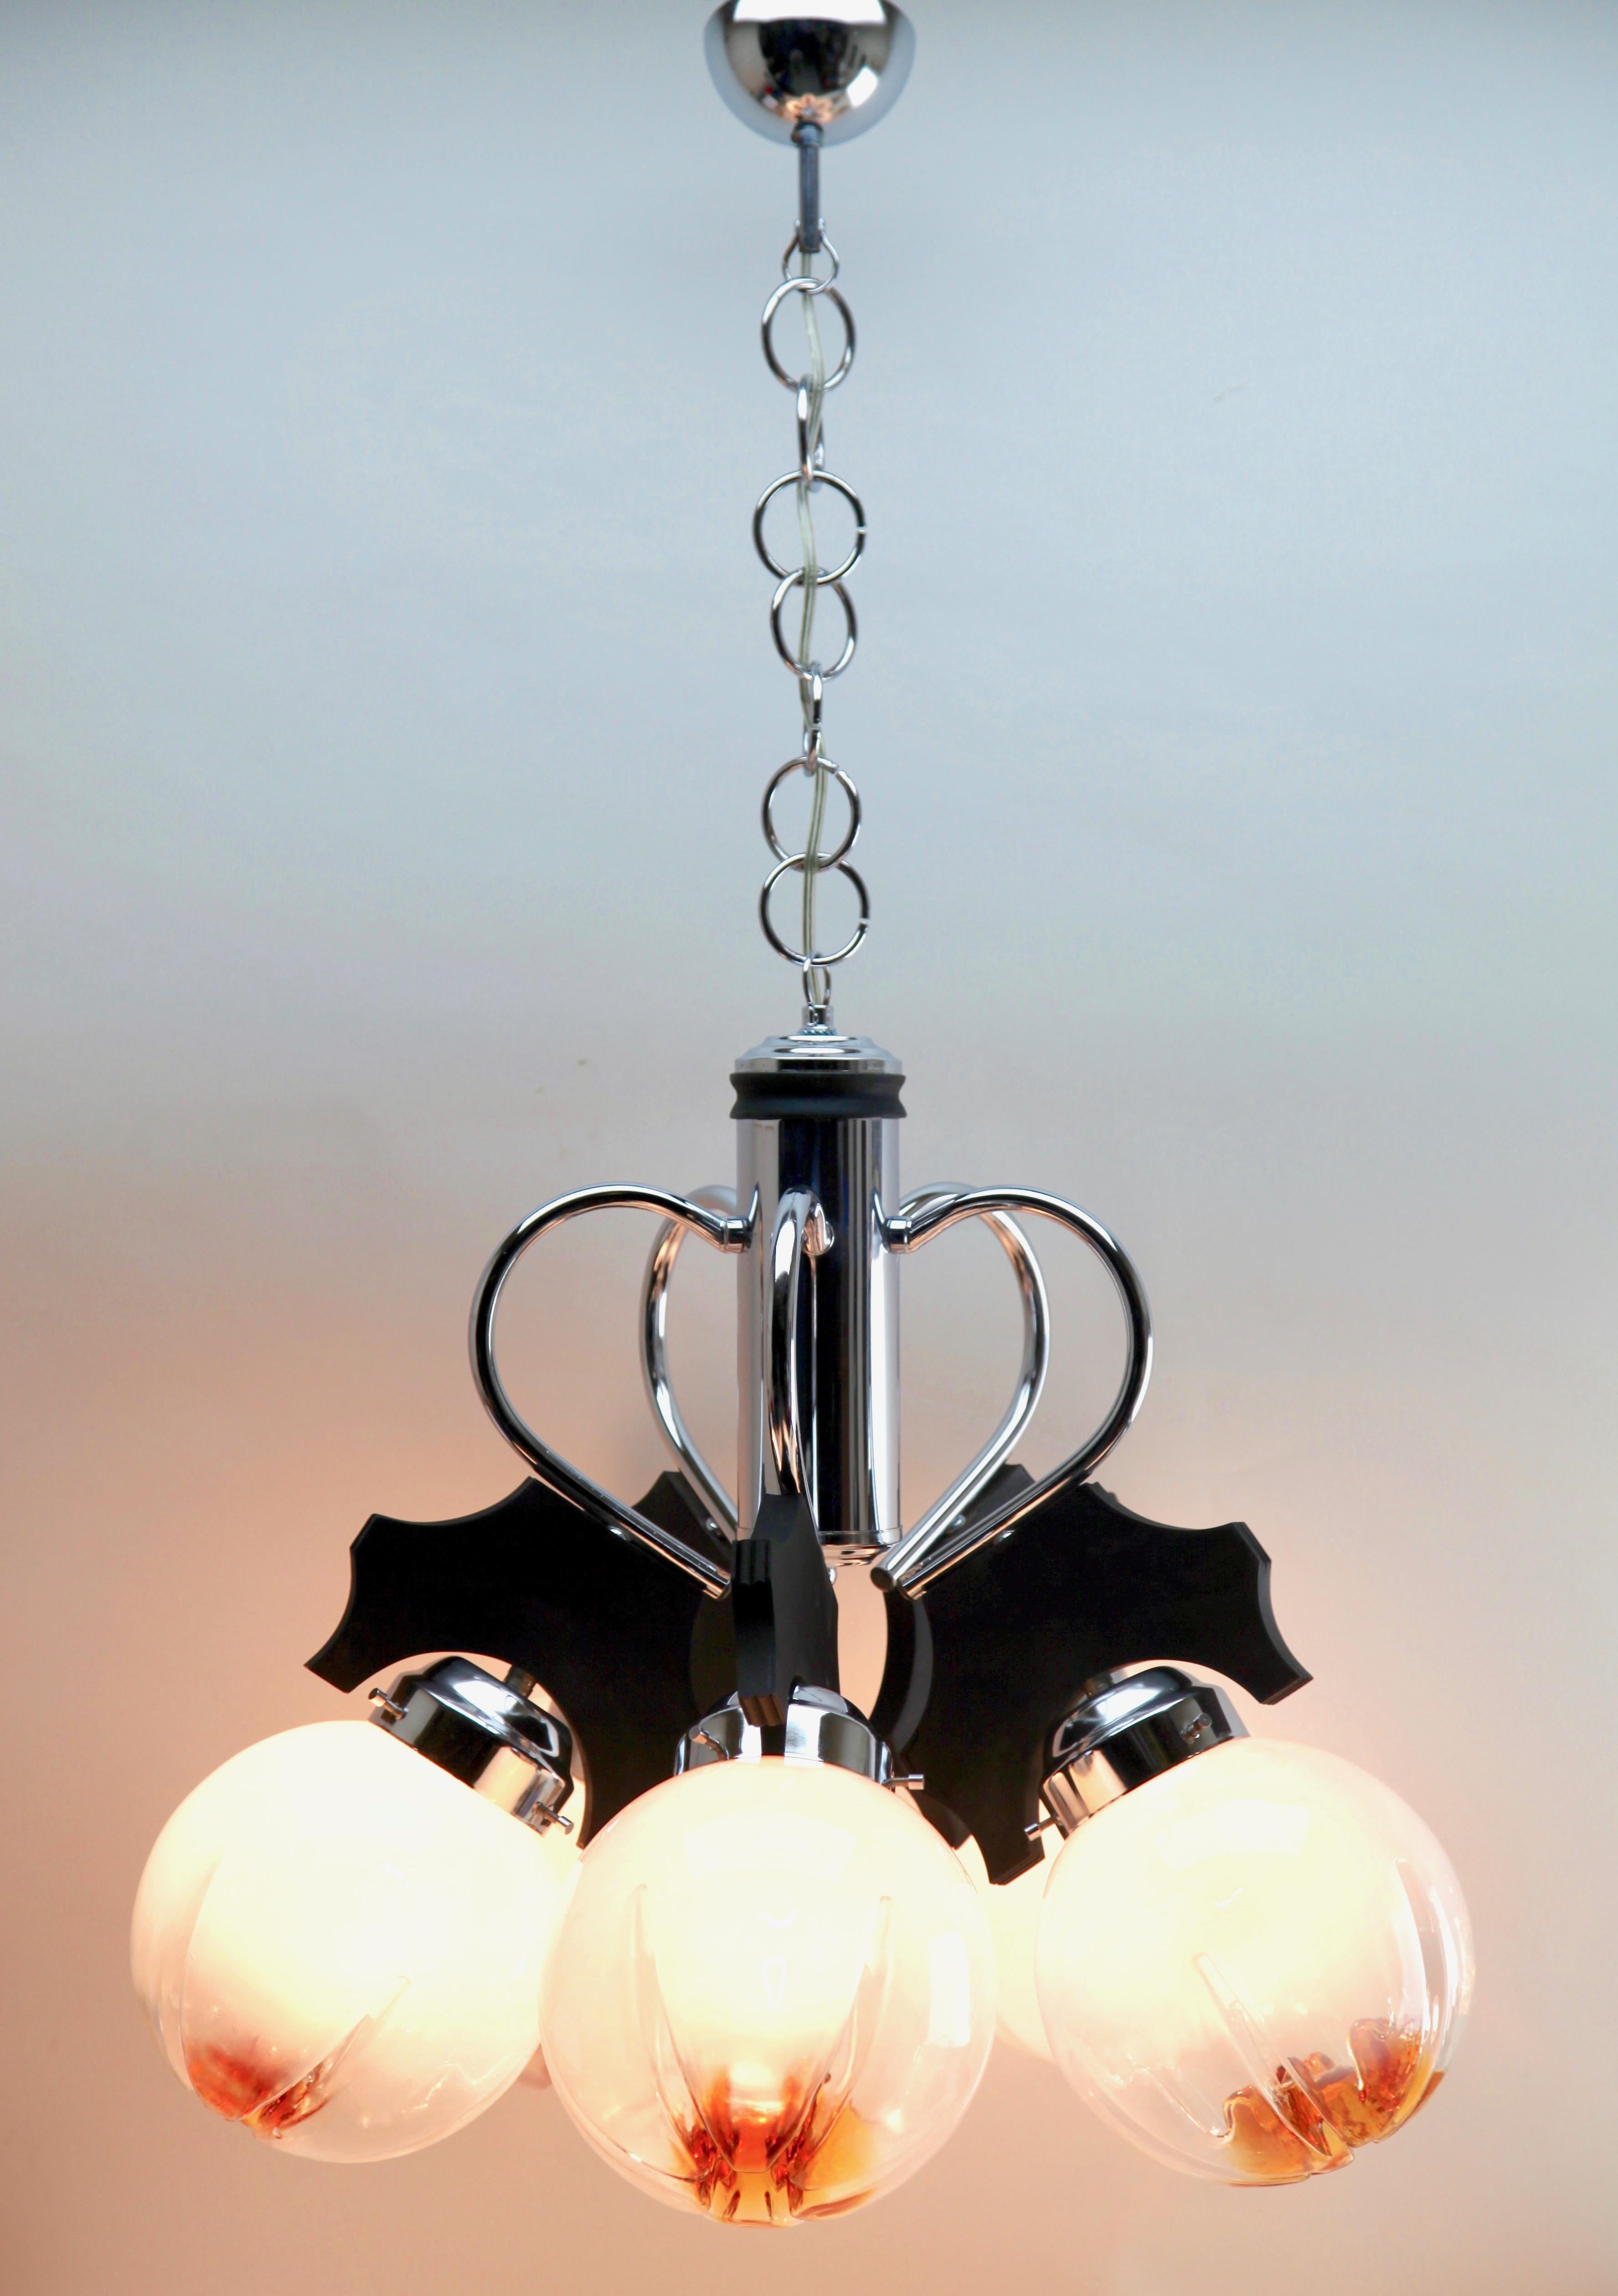 Pendant by Mazzega with 5 Globes of Clear Glass with Orange Inclusions For Sale 4